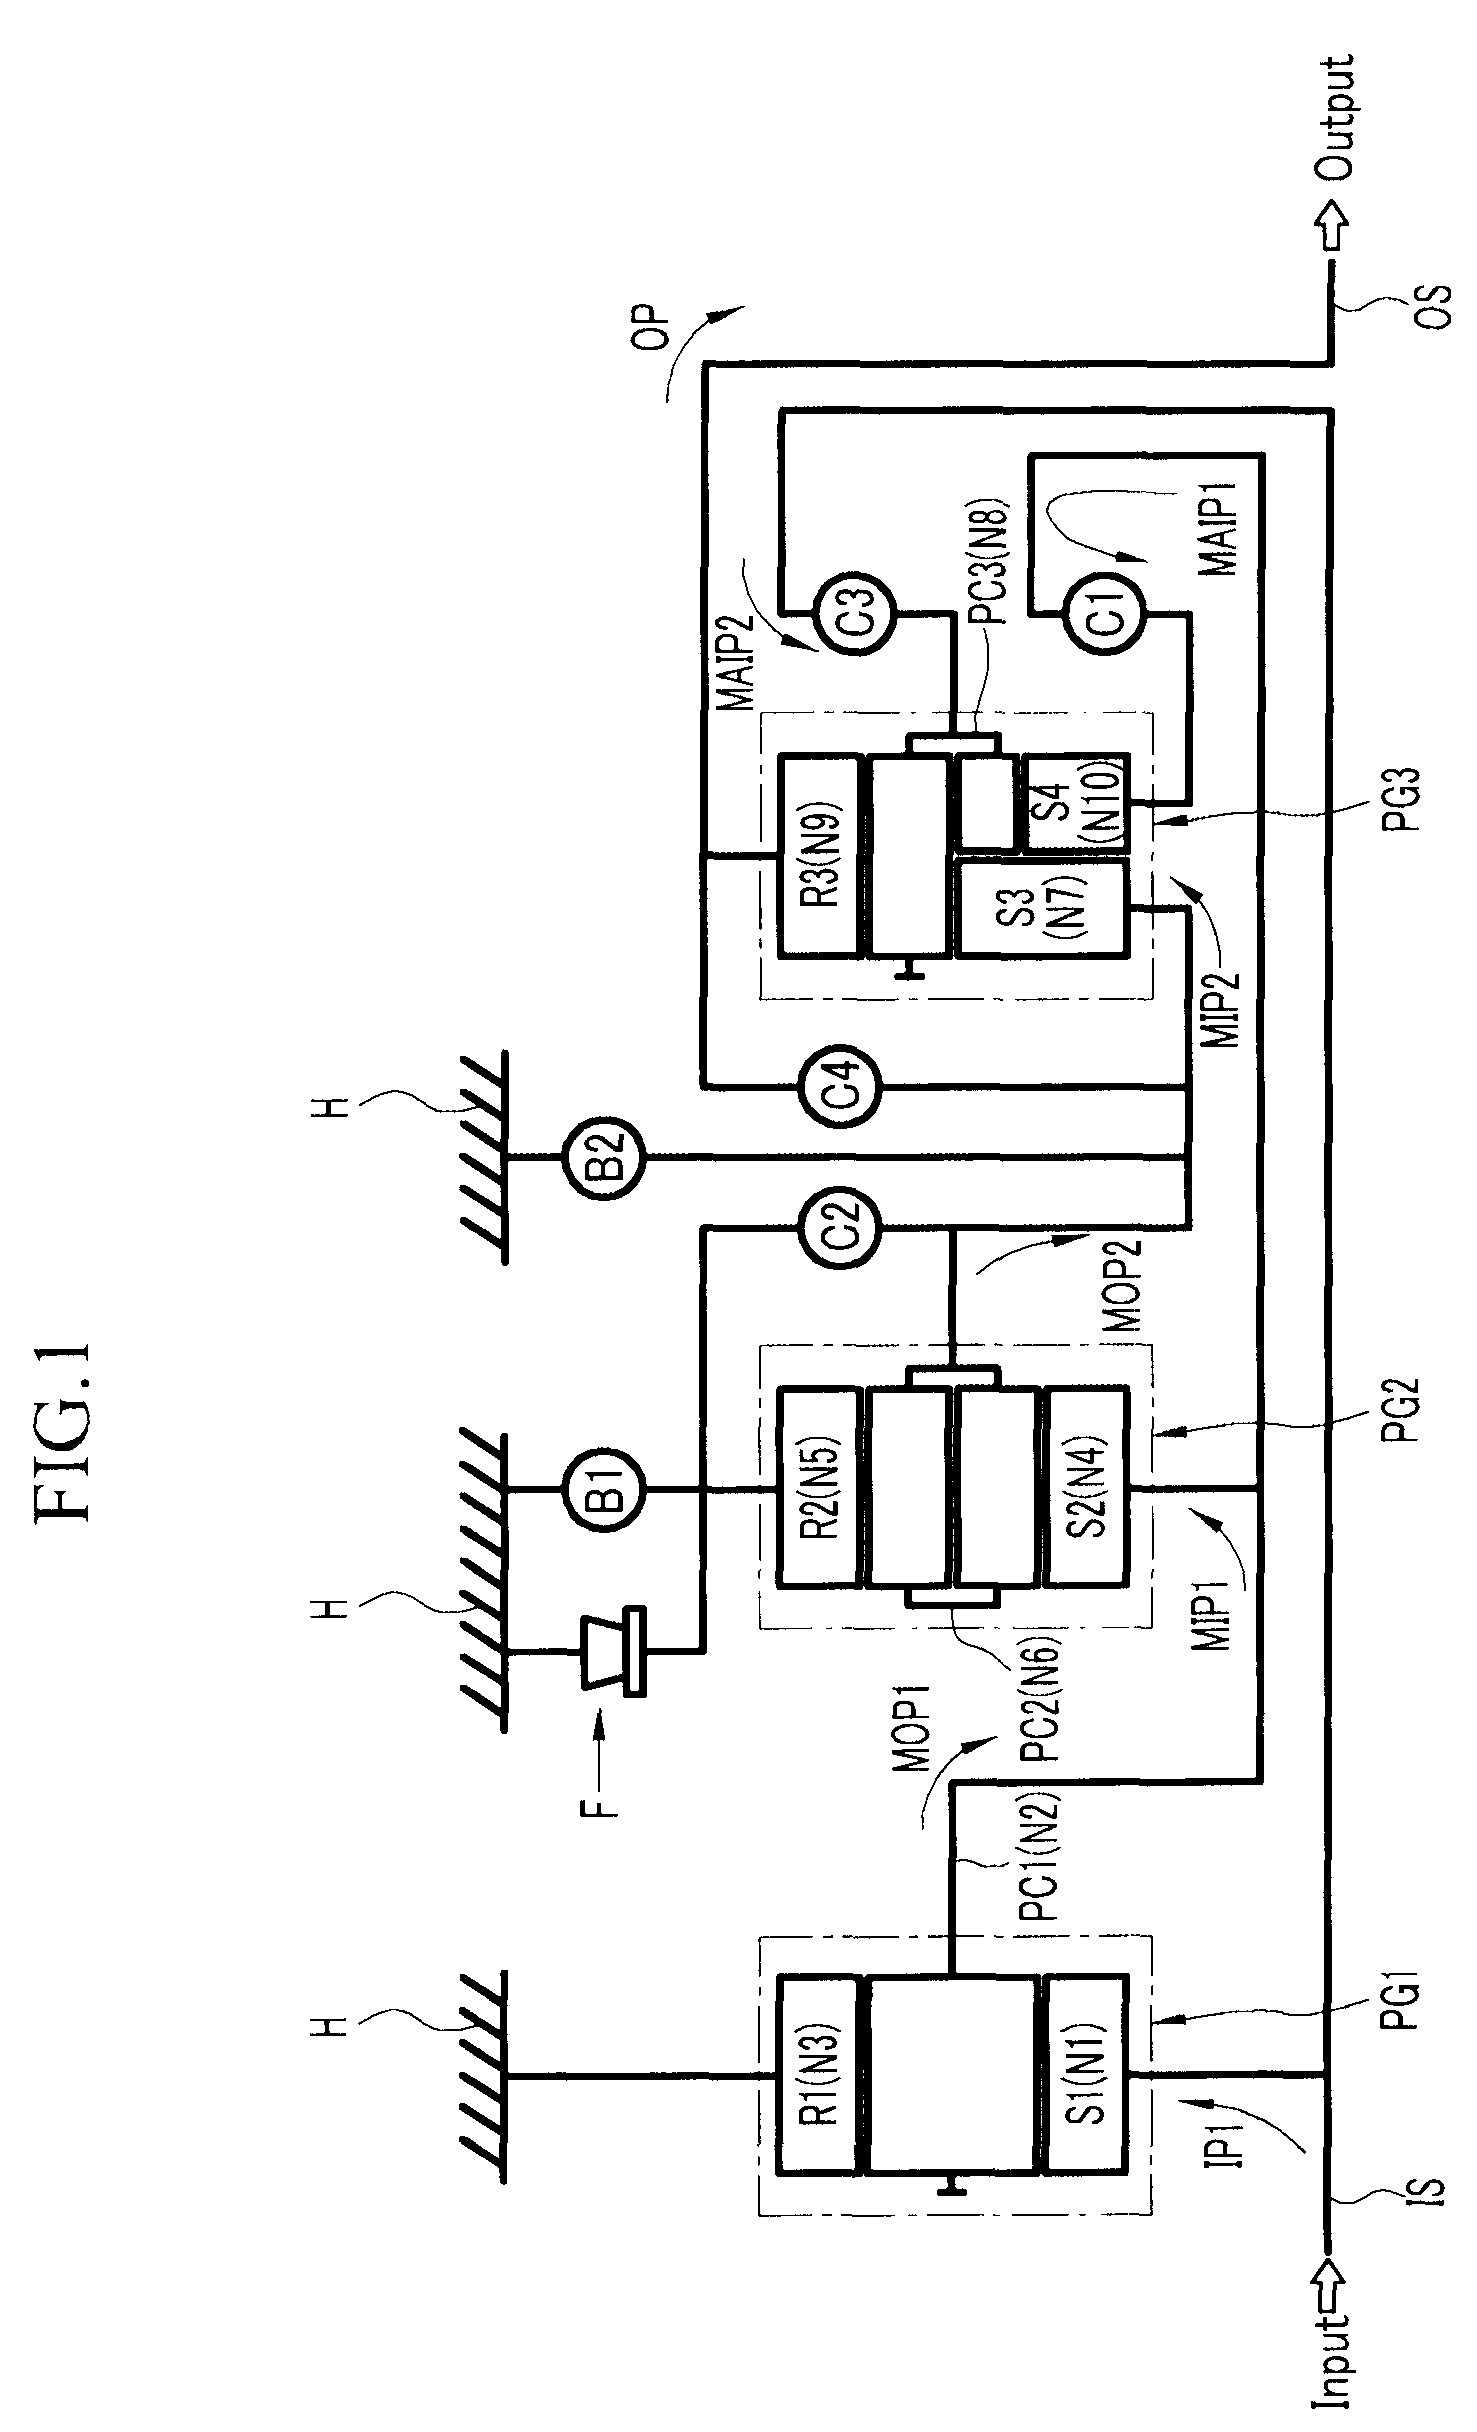 Gear train of an automatic transmission for a vehicle